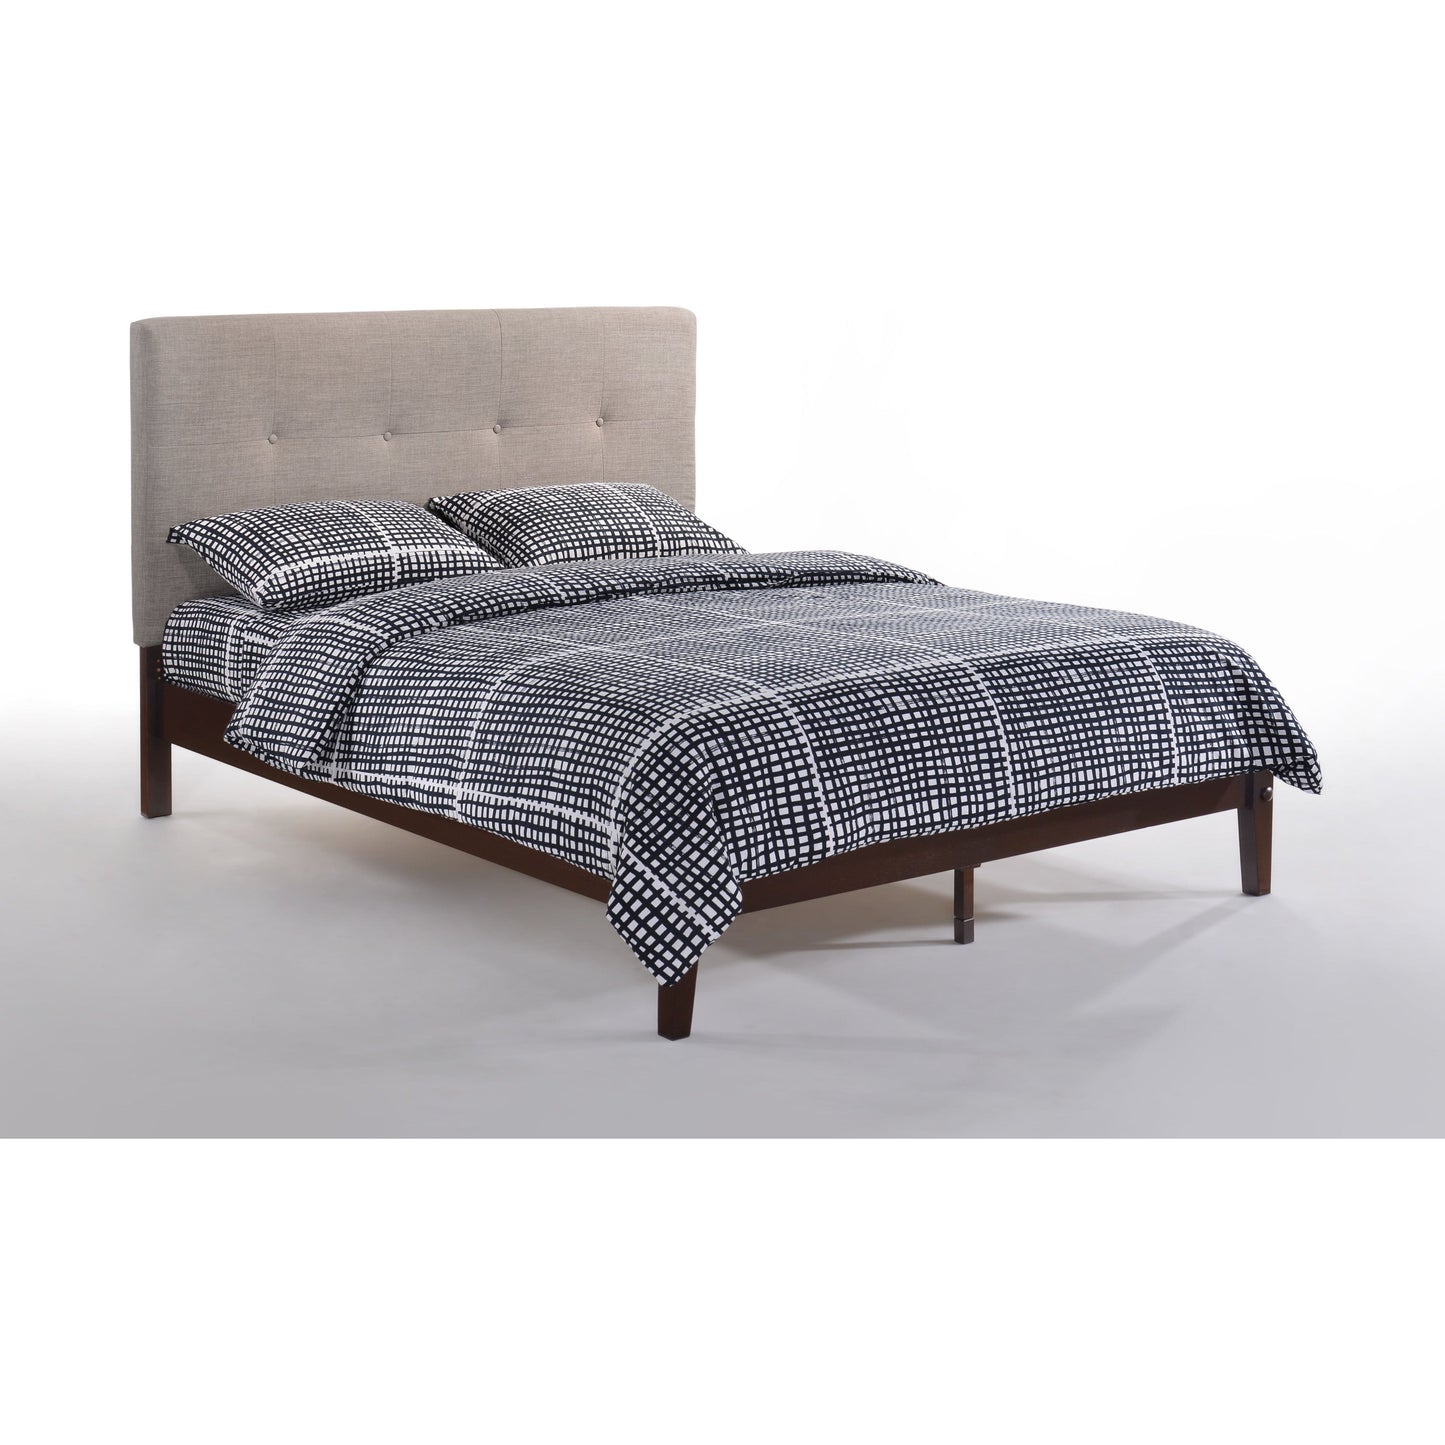 Night And Day Paprika King Bed in Charcoal with Chocolate Finish Frame (P Series) Grey PAP-PH-EKG-GY-CHO-COM